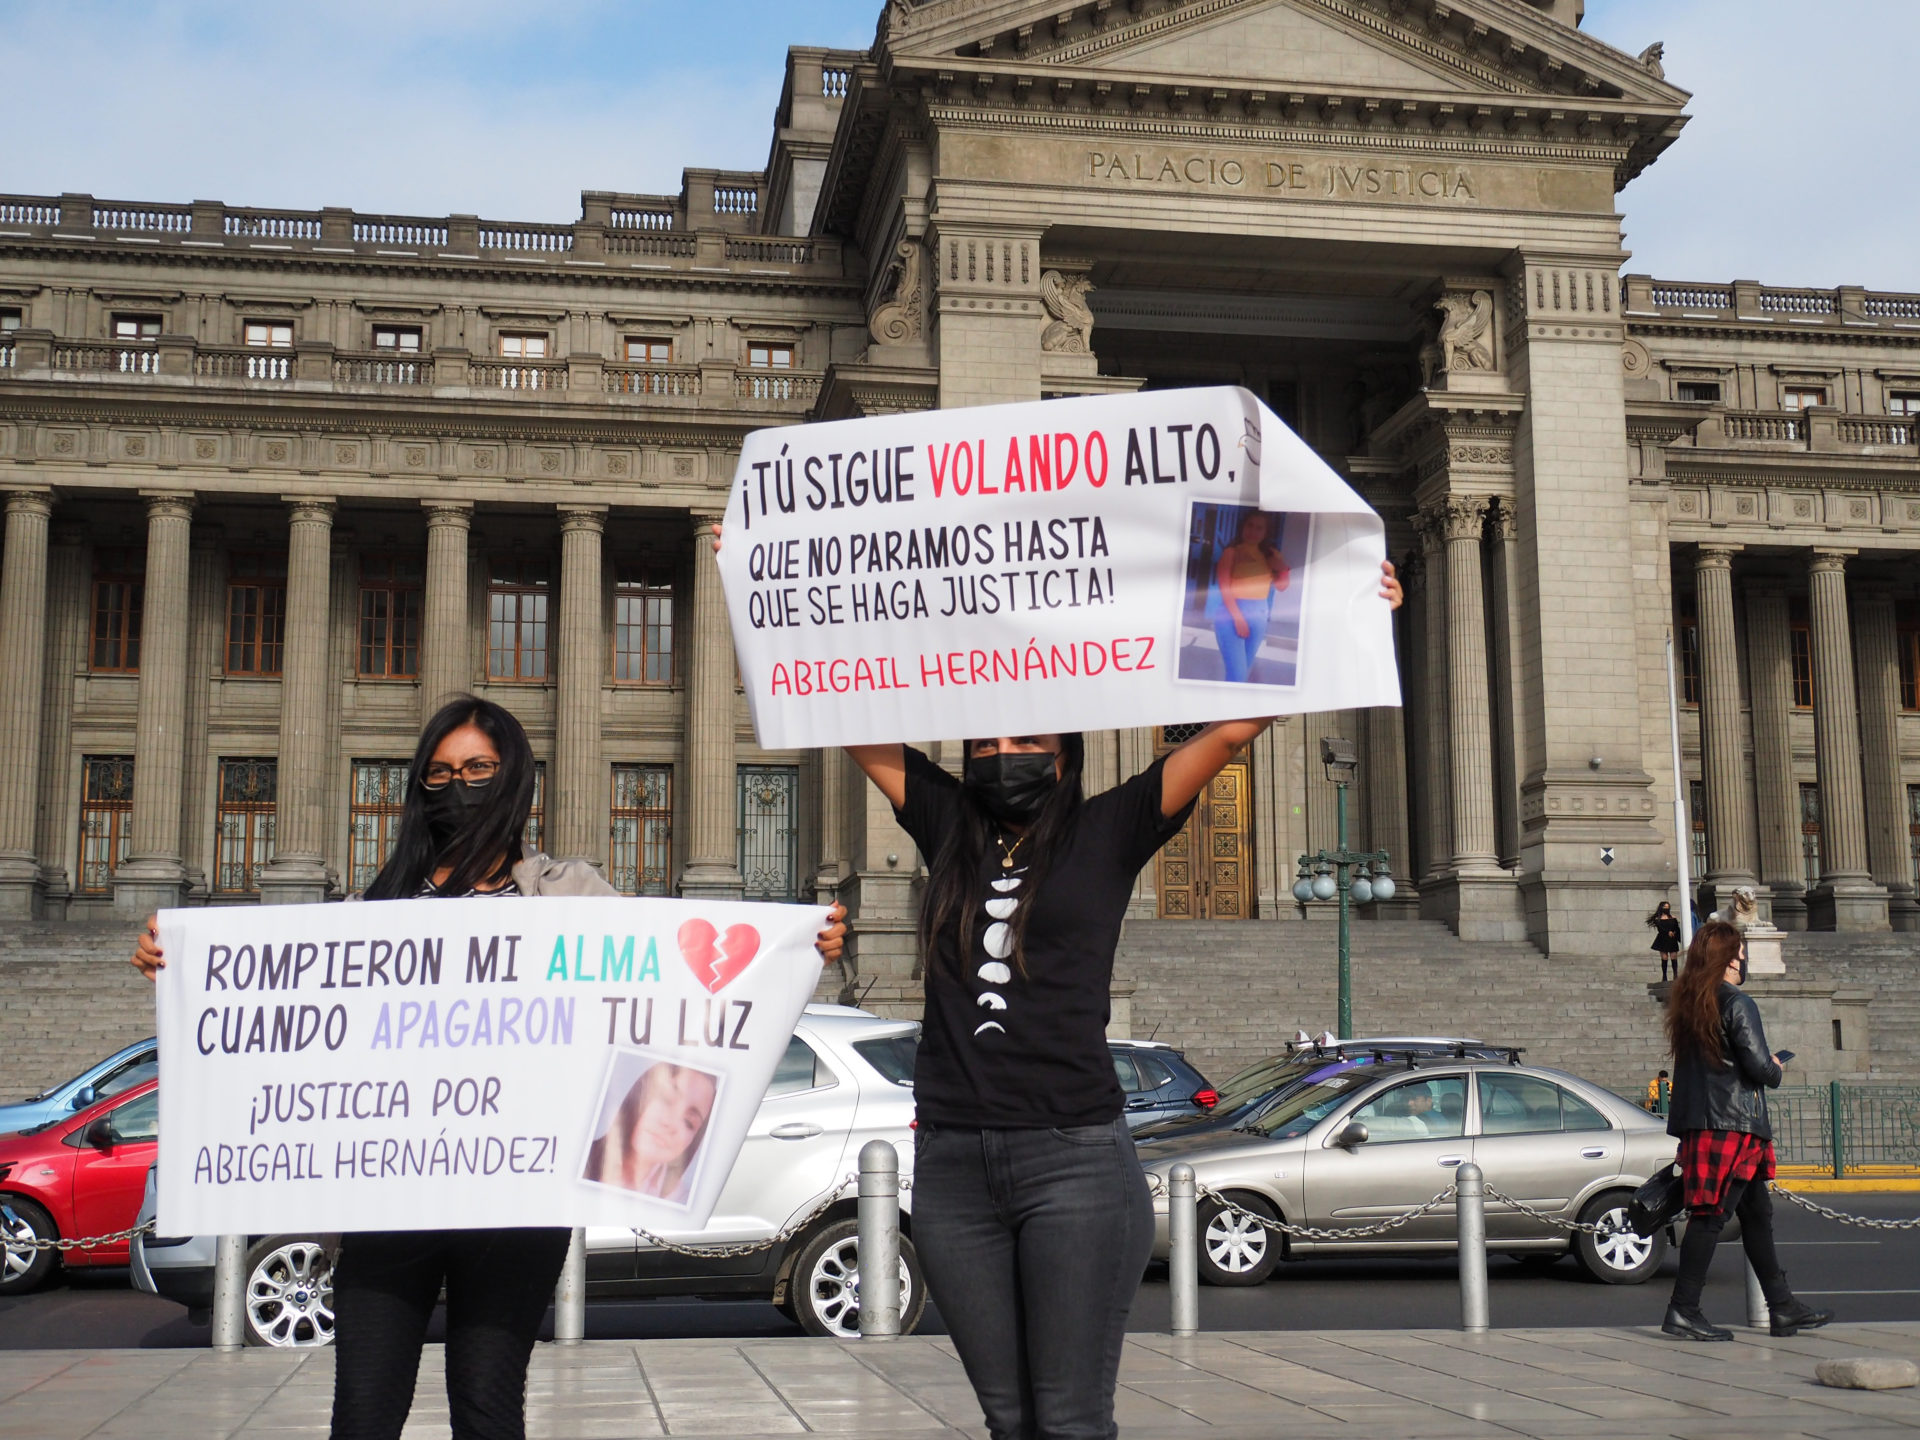 Banners calling for justice for victims of femicide when...